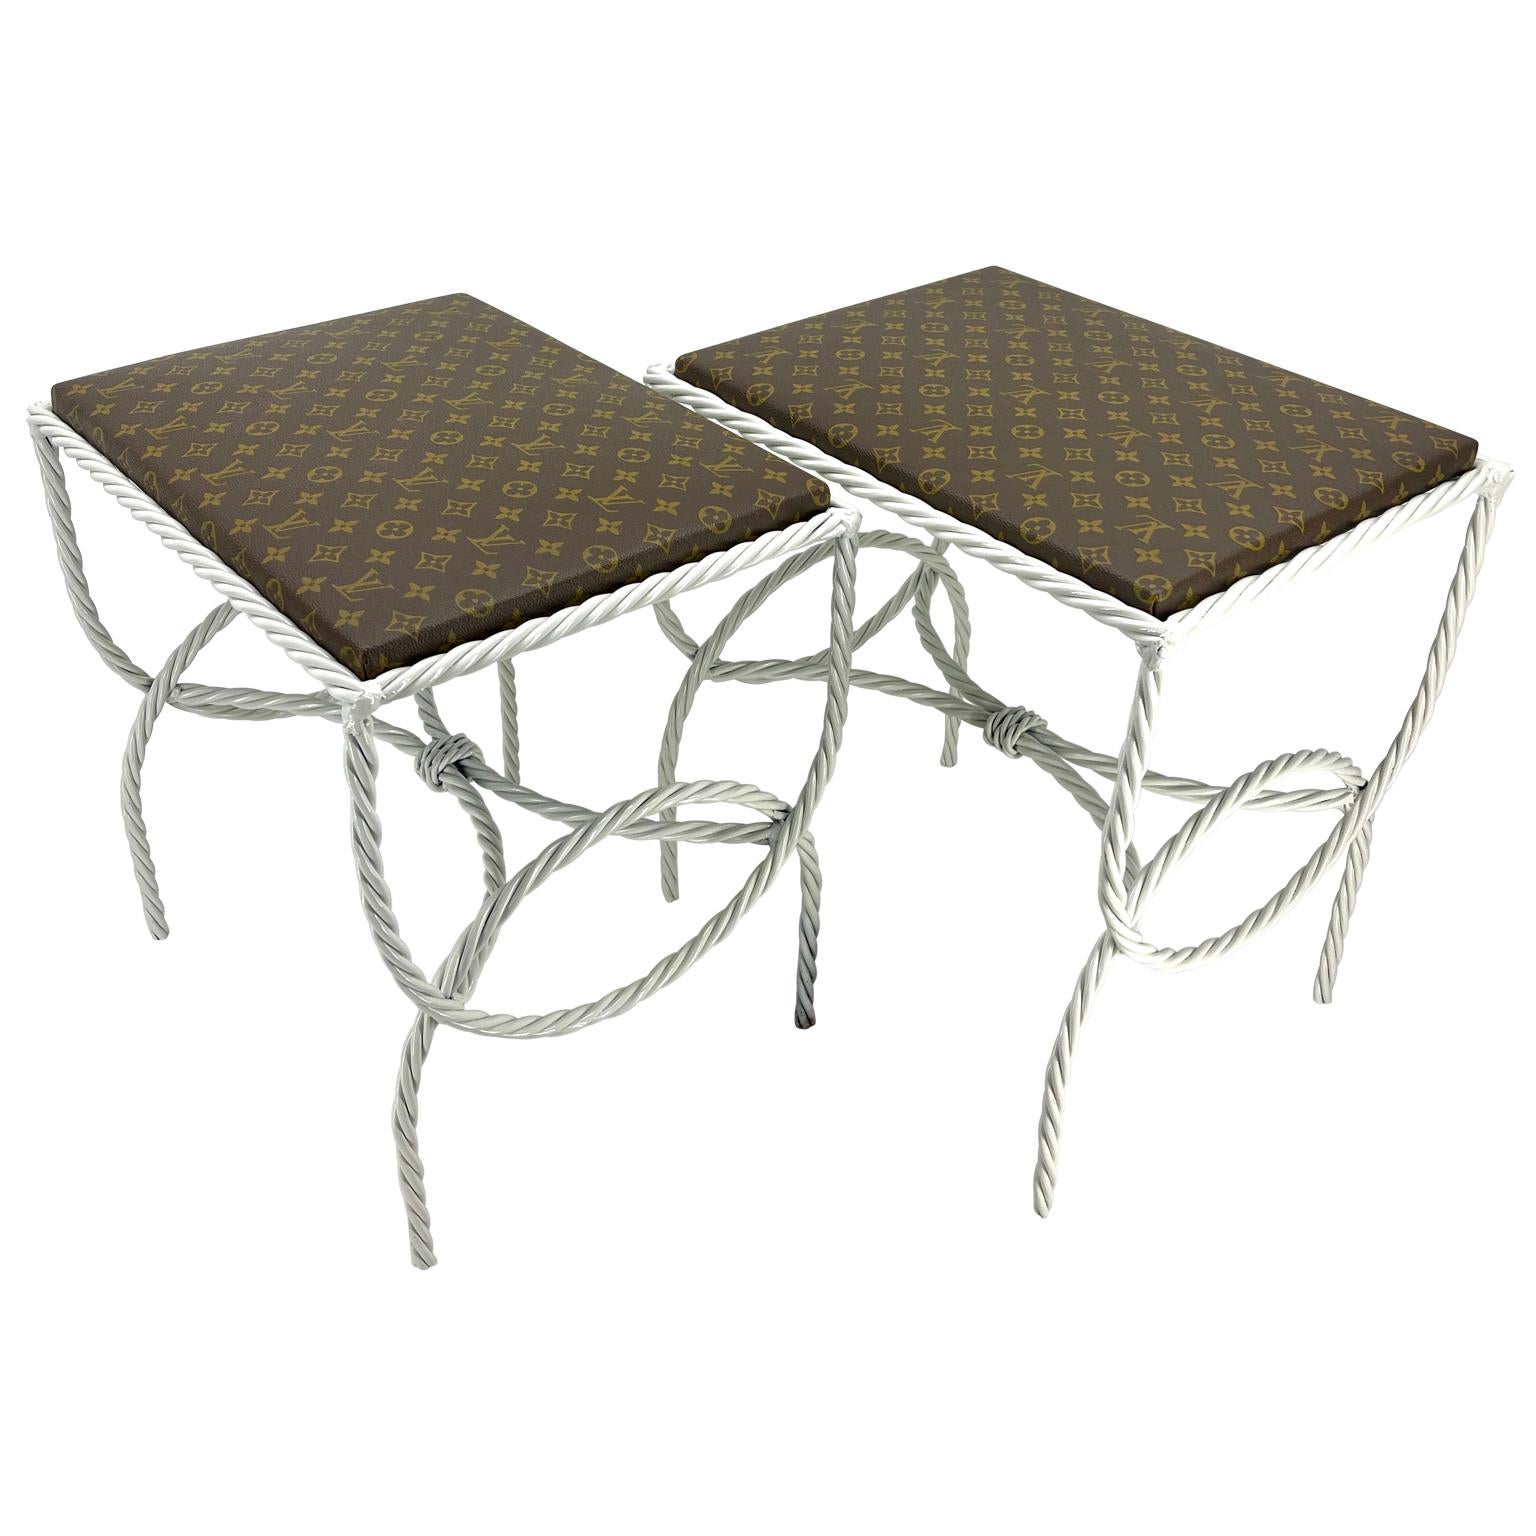 Pair of Roped Iron Benches Side Tables with Louis Vuitton Monogram Fabric For Sale